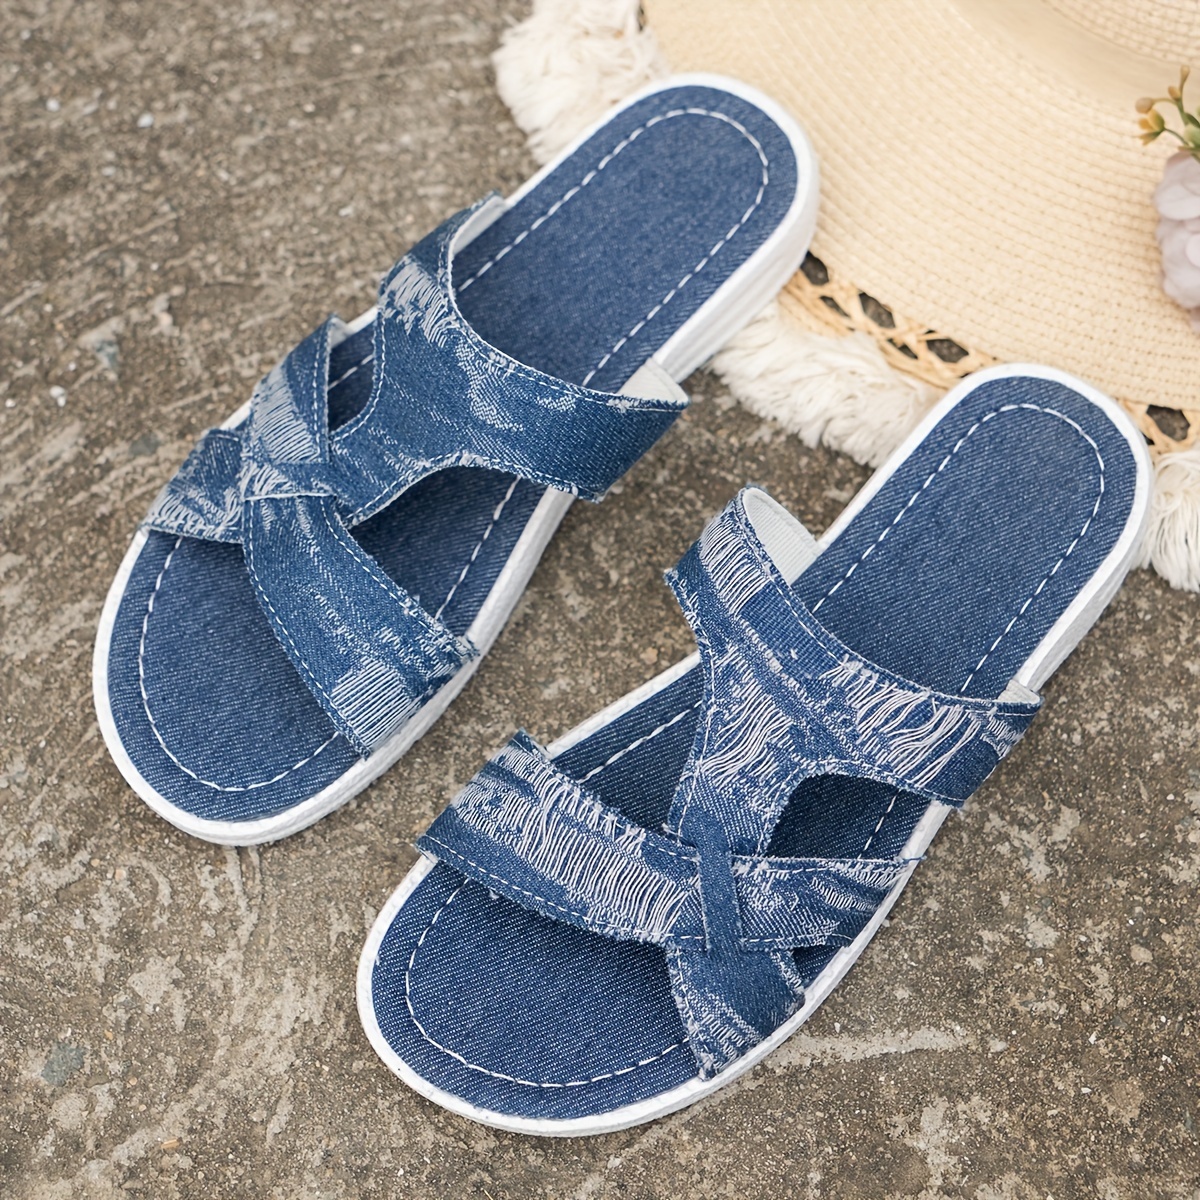 

Women's Denim Ripped Detail Slide Shoes, Casual Open Toe Summer Shoes, Comfy Outdoor Flat Slides